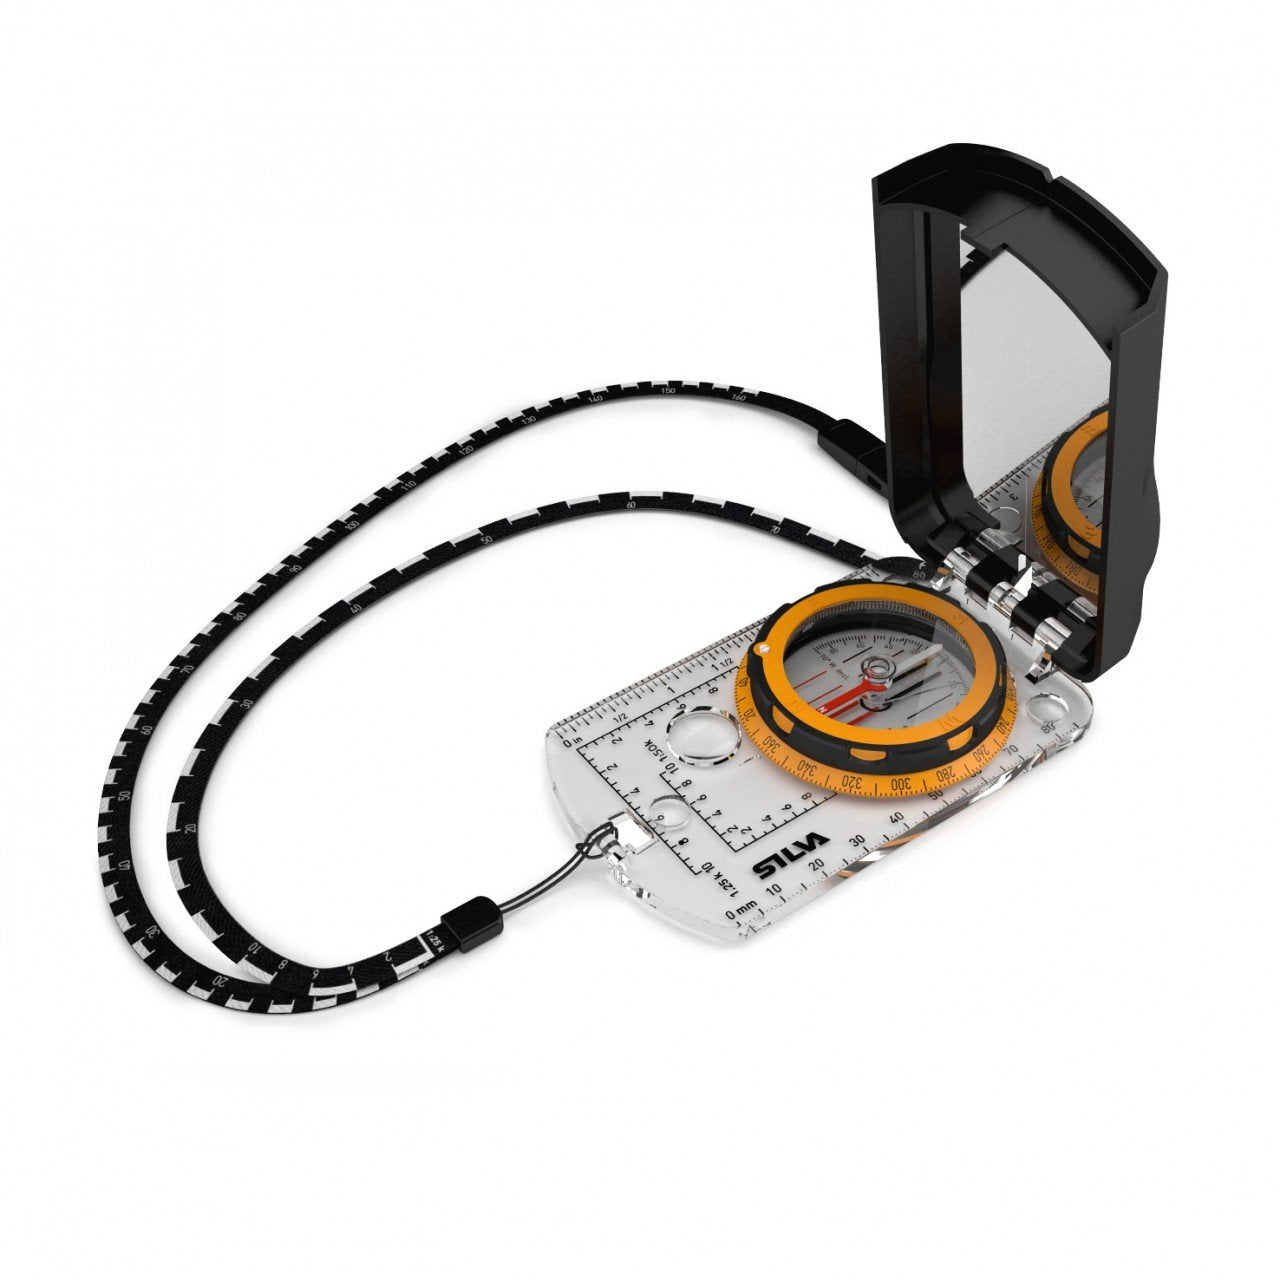 Silva Expedition Compass - Sighting (Magnetic South)